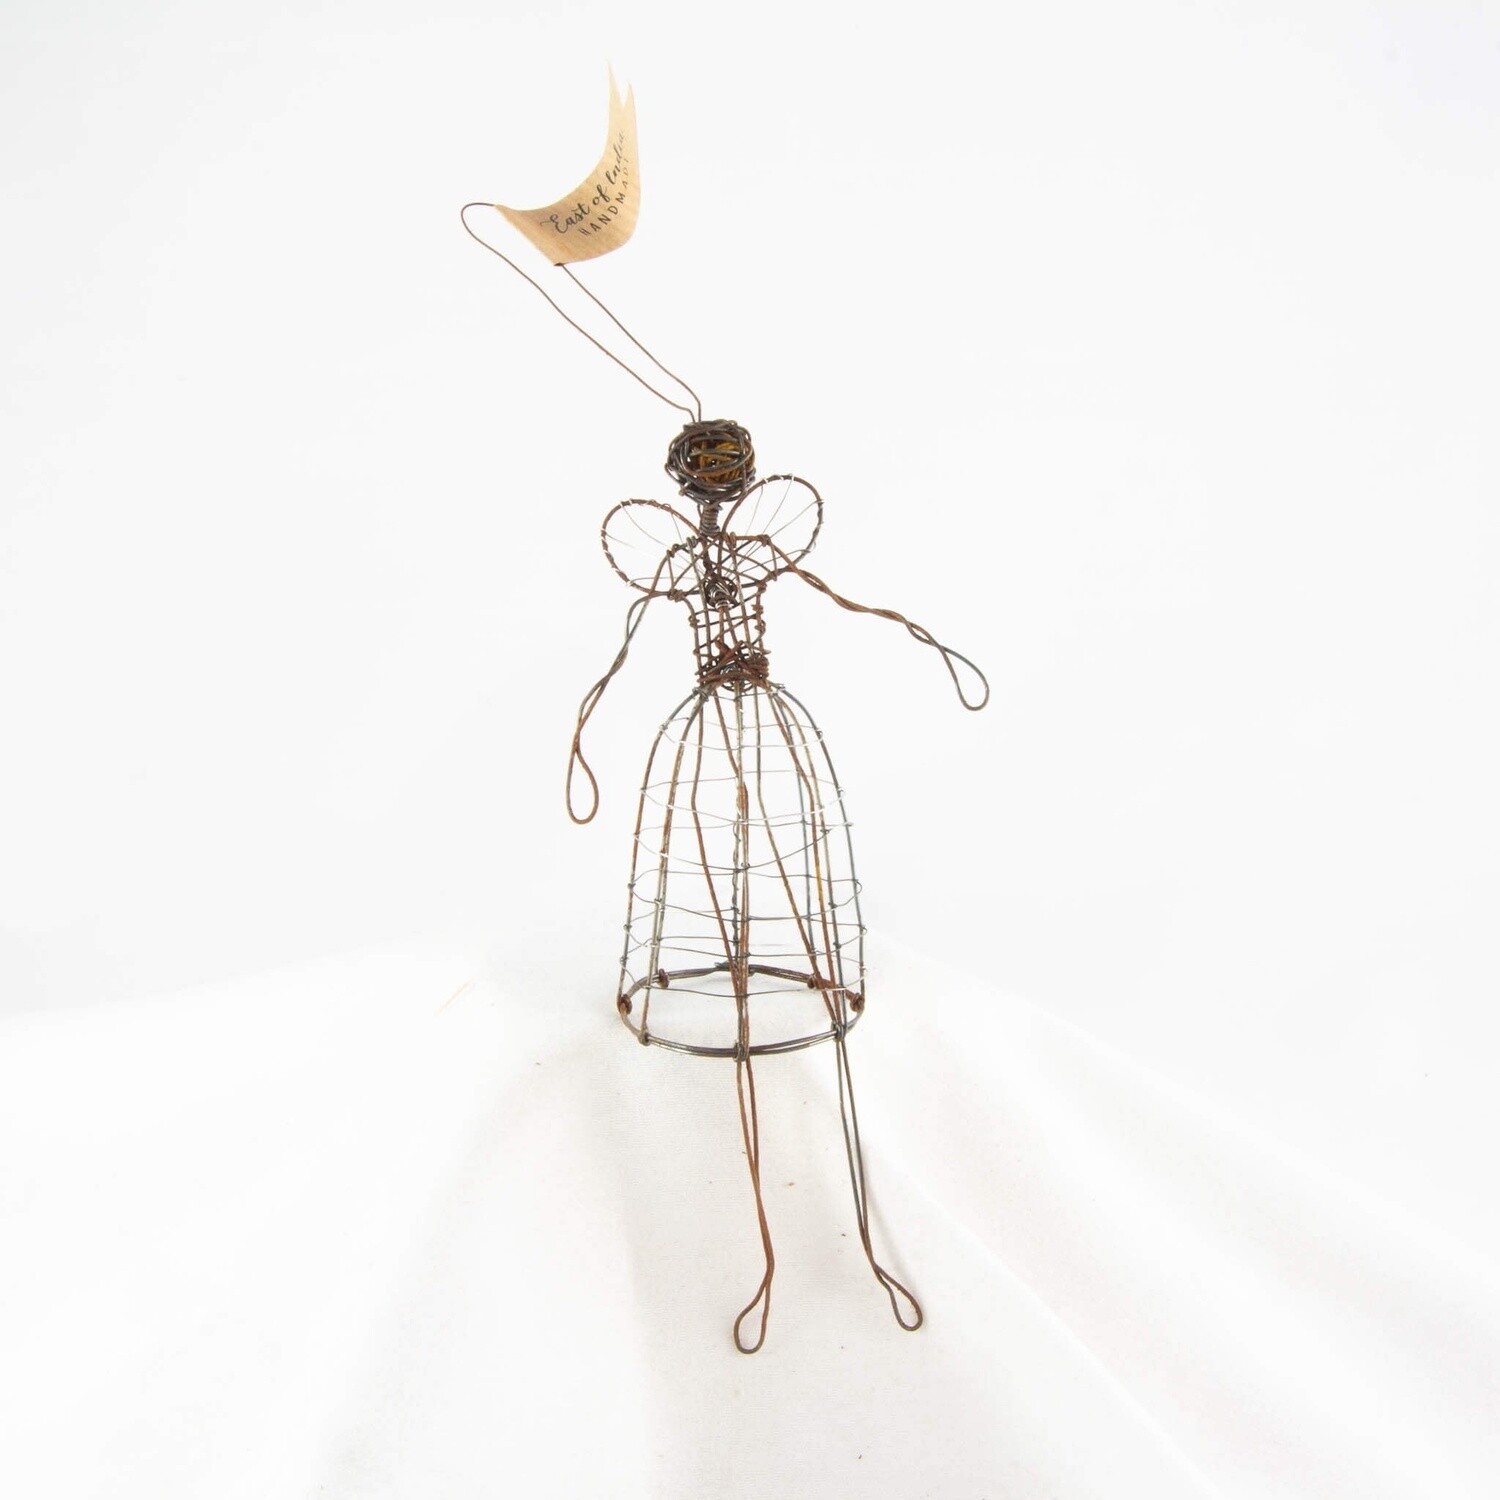 Woven Rusty Wire Angel - Small